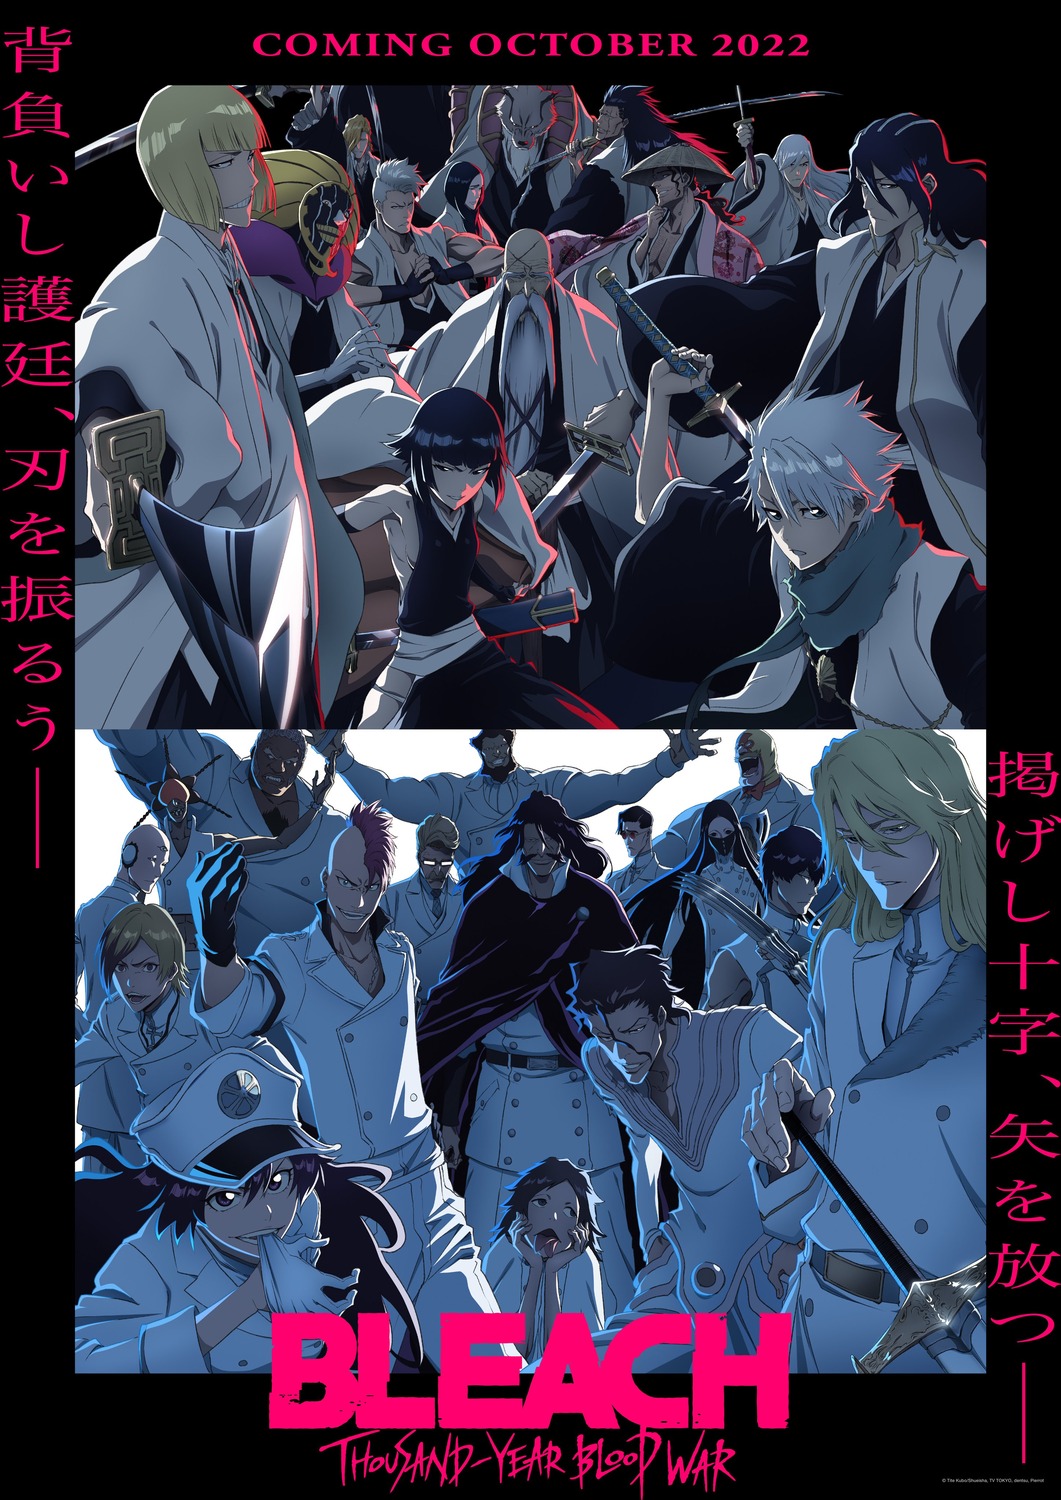 Extra Large TV Poster Image for Bleach: Thousand Year Blood War (#2 of 7)